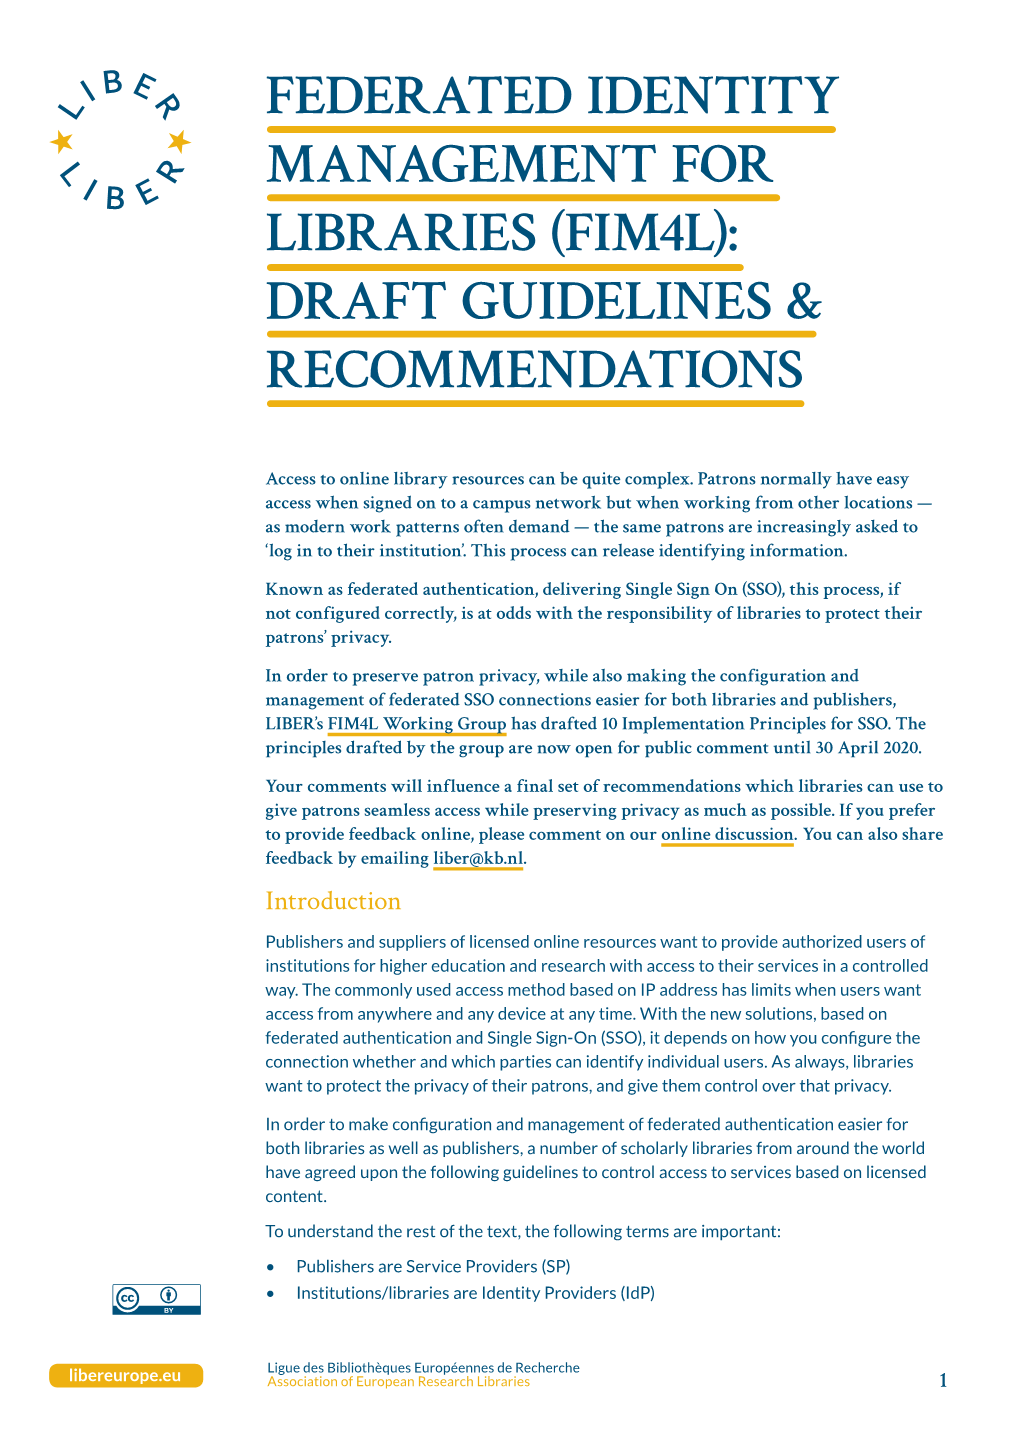 Federated Identity Management for Libraries (Fim4l): Draft Guidelines & Recommendations